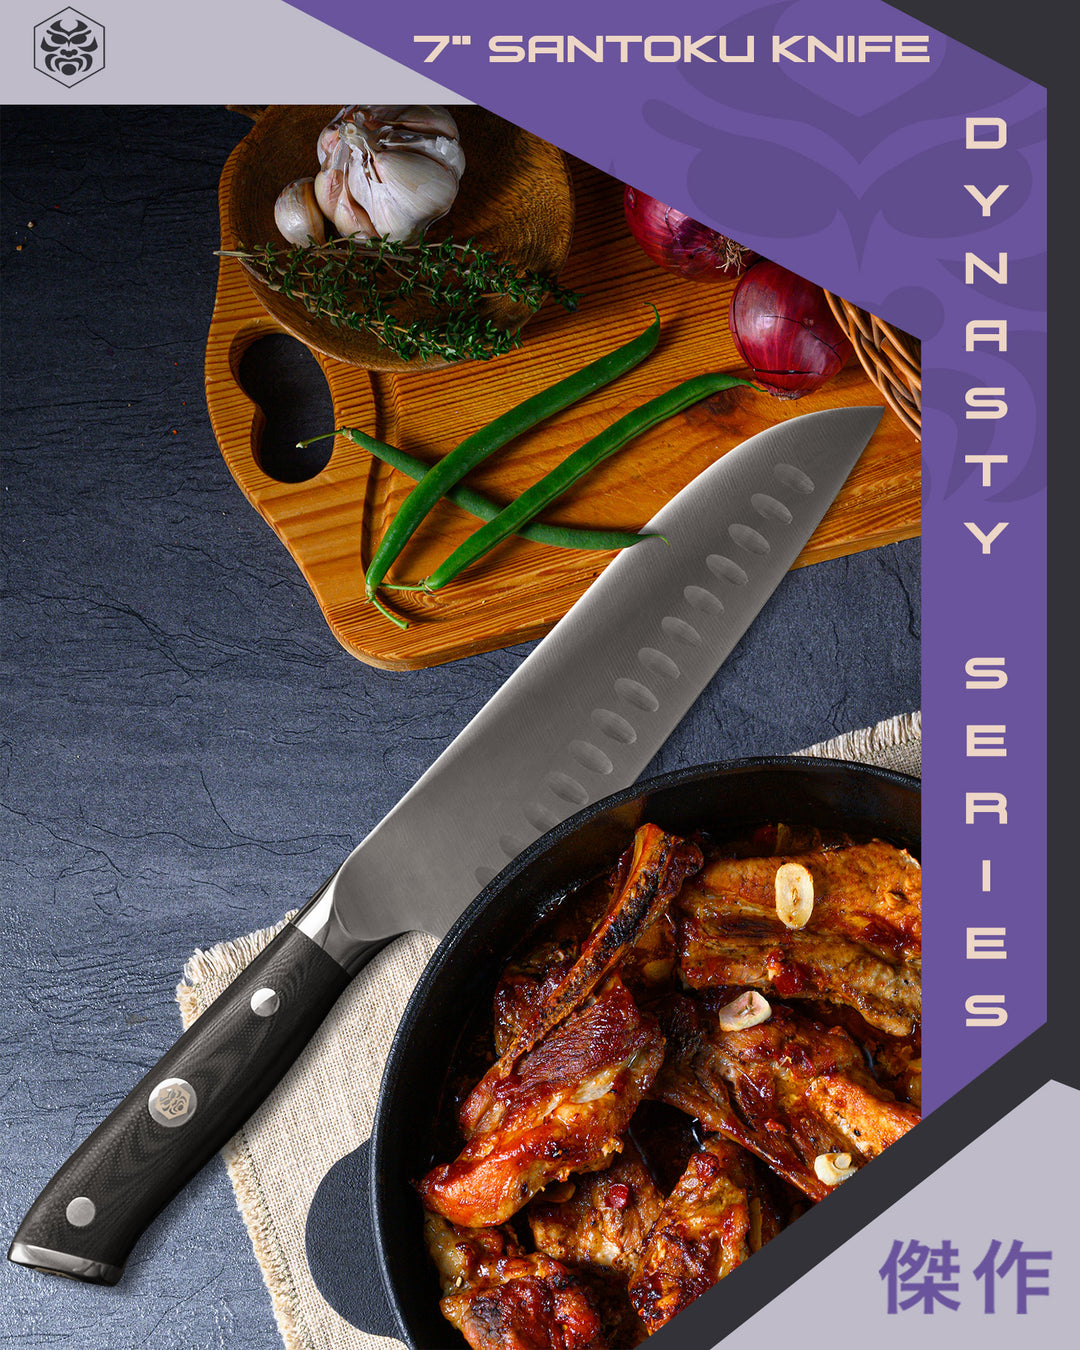 The Dynasty Santoku with sautéed chickens, green beans, red onions, and garlic